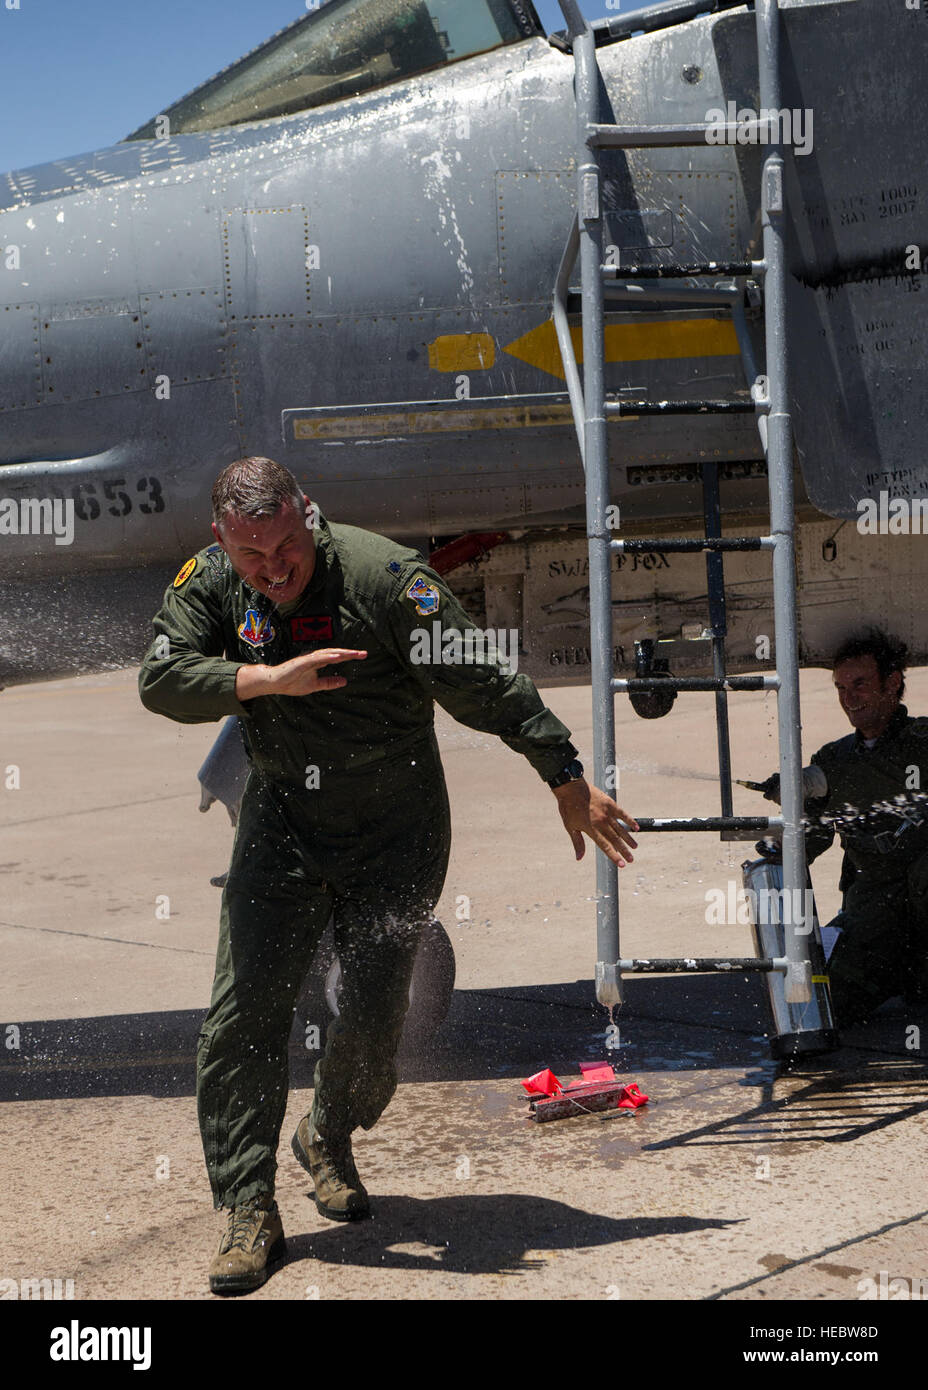 Lt. Col. Ronald King gets sprayed down with water after his first solo flight in the QF-4 Drone June 3, 2015, at Holloman Air Force Base, N.M. Lieutenant. Col. Ronald King, 82nd Aerial Target Squadron, Detachment 1 commander, flew the QF-4 for the first time solo, making him the last pilot in the Air Force that learned to fly the QF-4. He was accompanied by James  Harkins, a civilian pilot with the 82nd ATRS, Det 1, who also served as King’s instructor pilot at the U.S. Air Force Academy in the 1990s and at Luke Air Force Base, Ariz. in the early 2000s. (U.S. Air Force photo by Airman 1st Clas Stock Photo